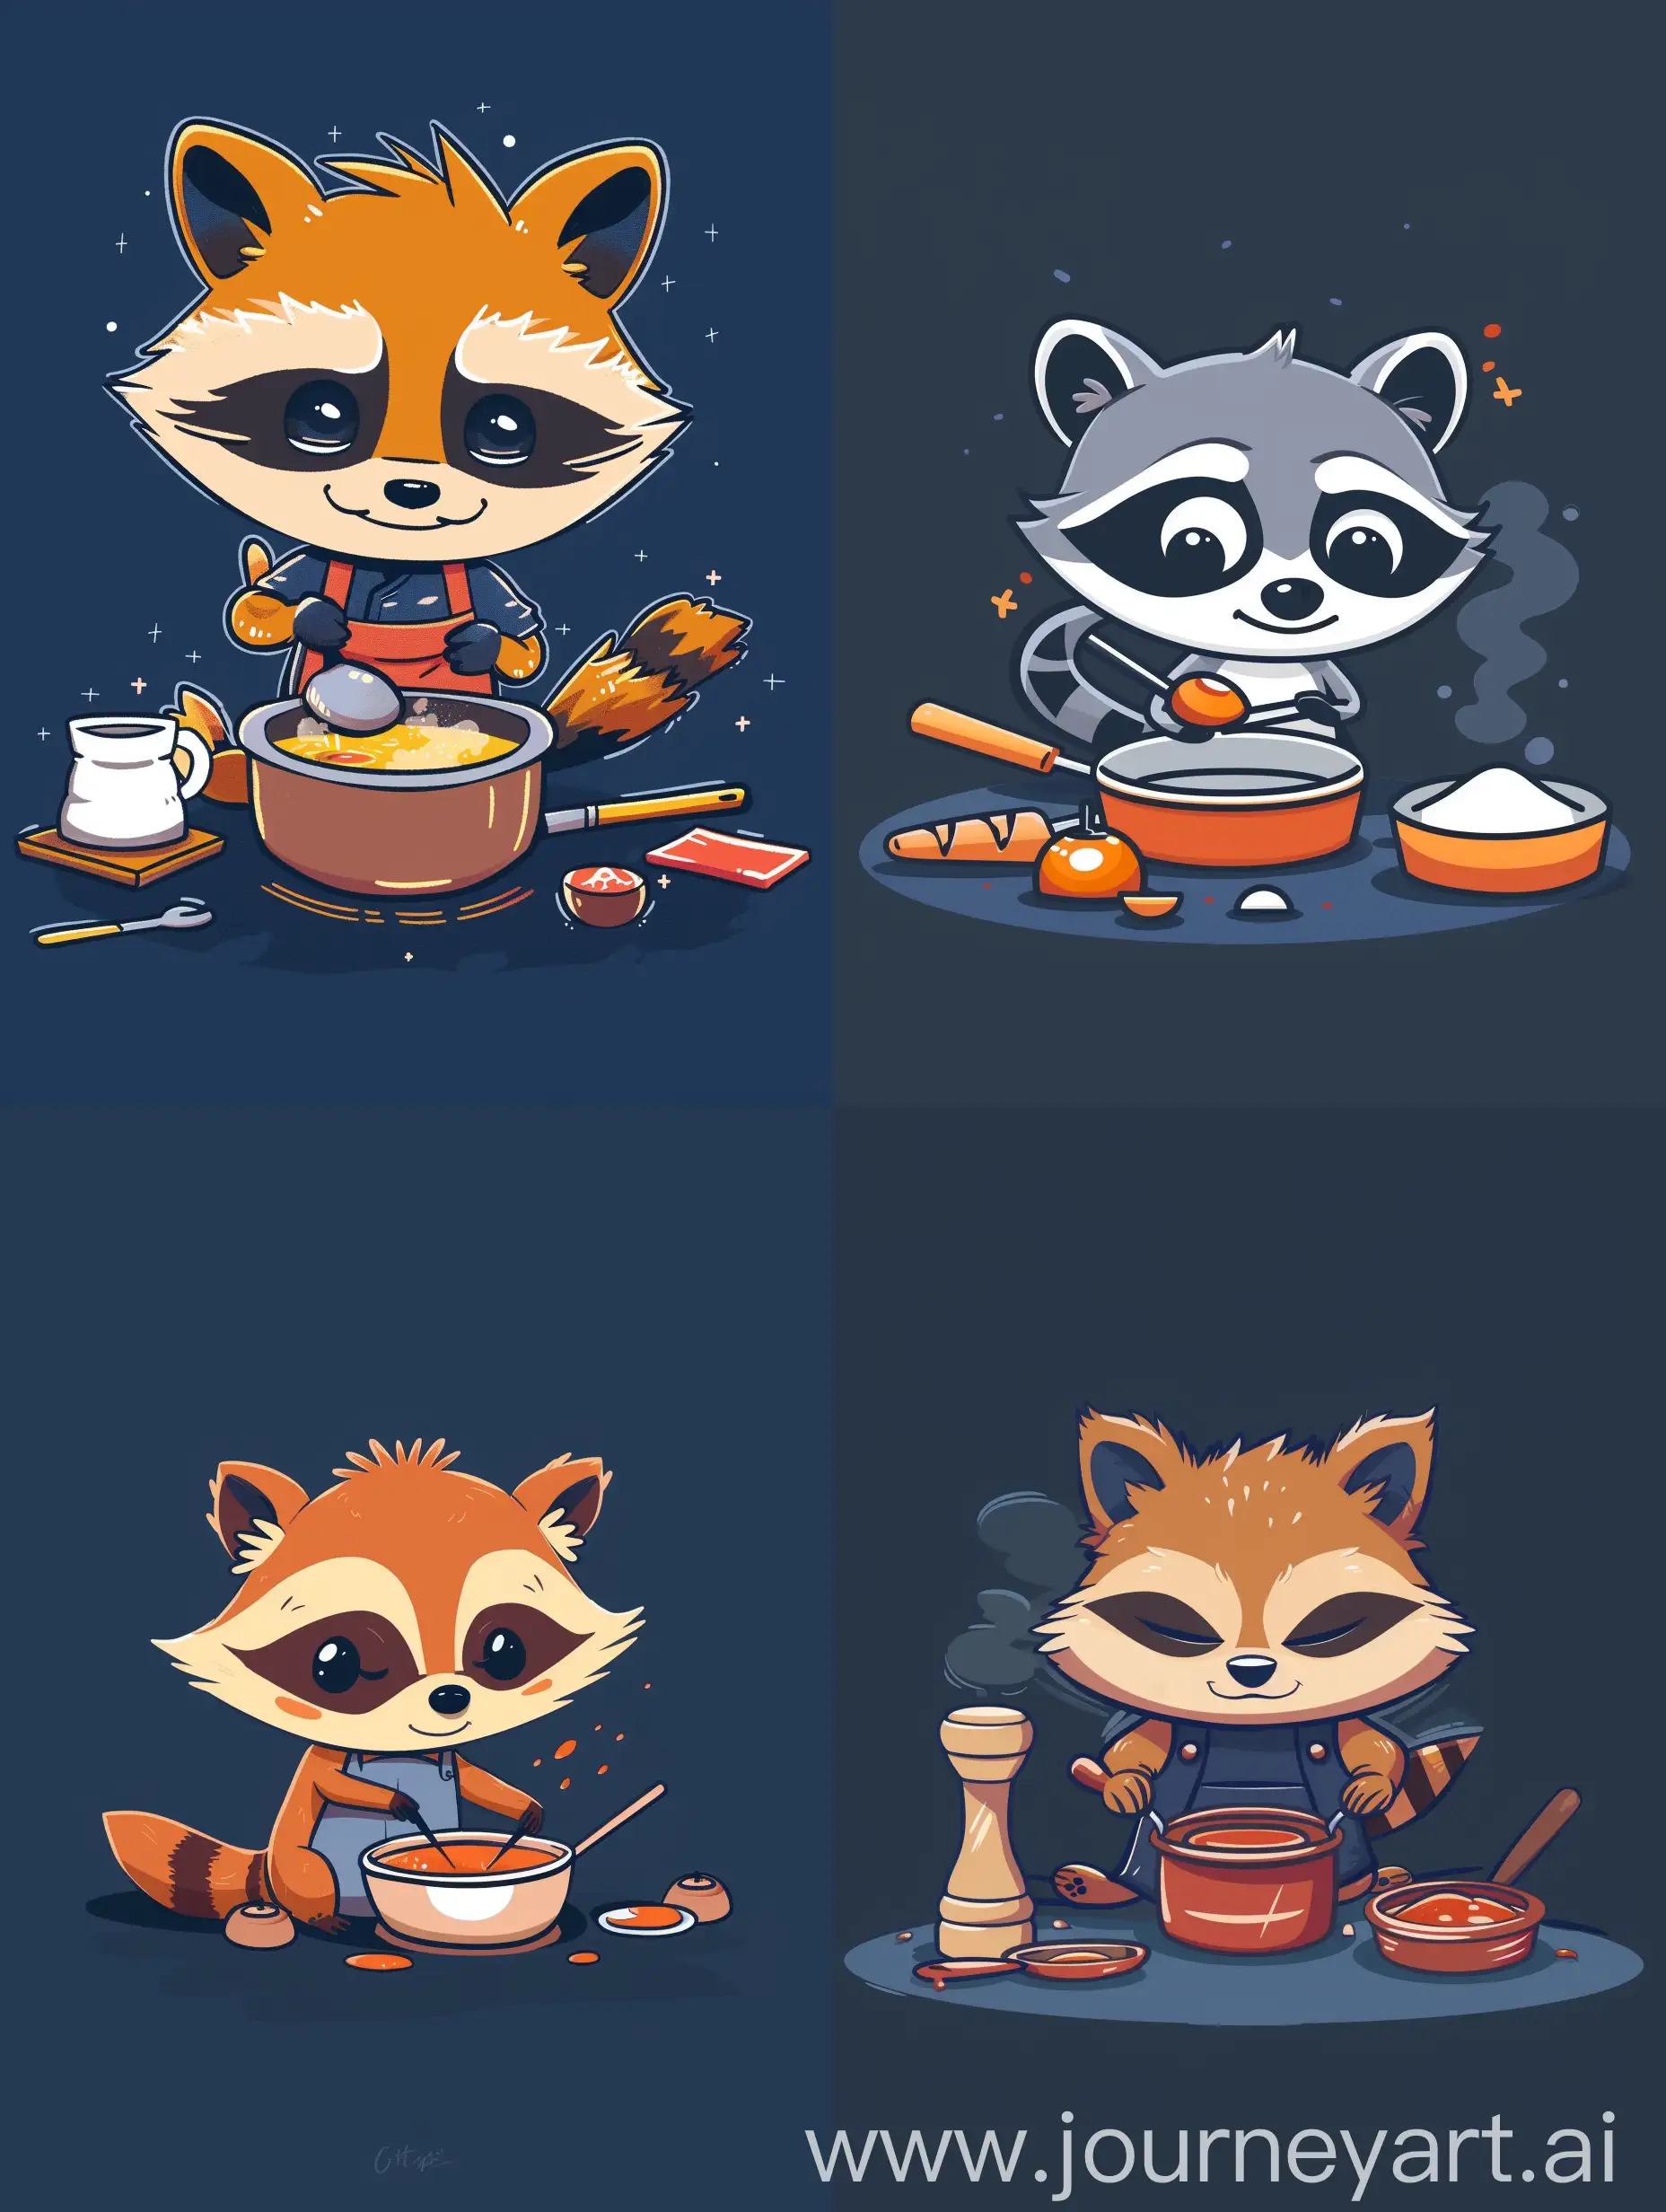 Adorable-Chibi-Raccoon-Cooking-Against-Deep-Blue-Background